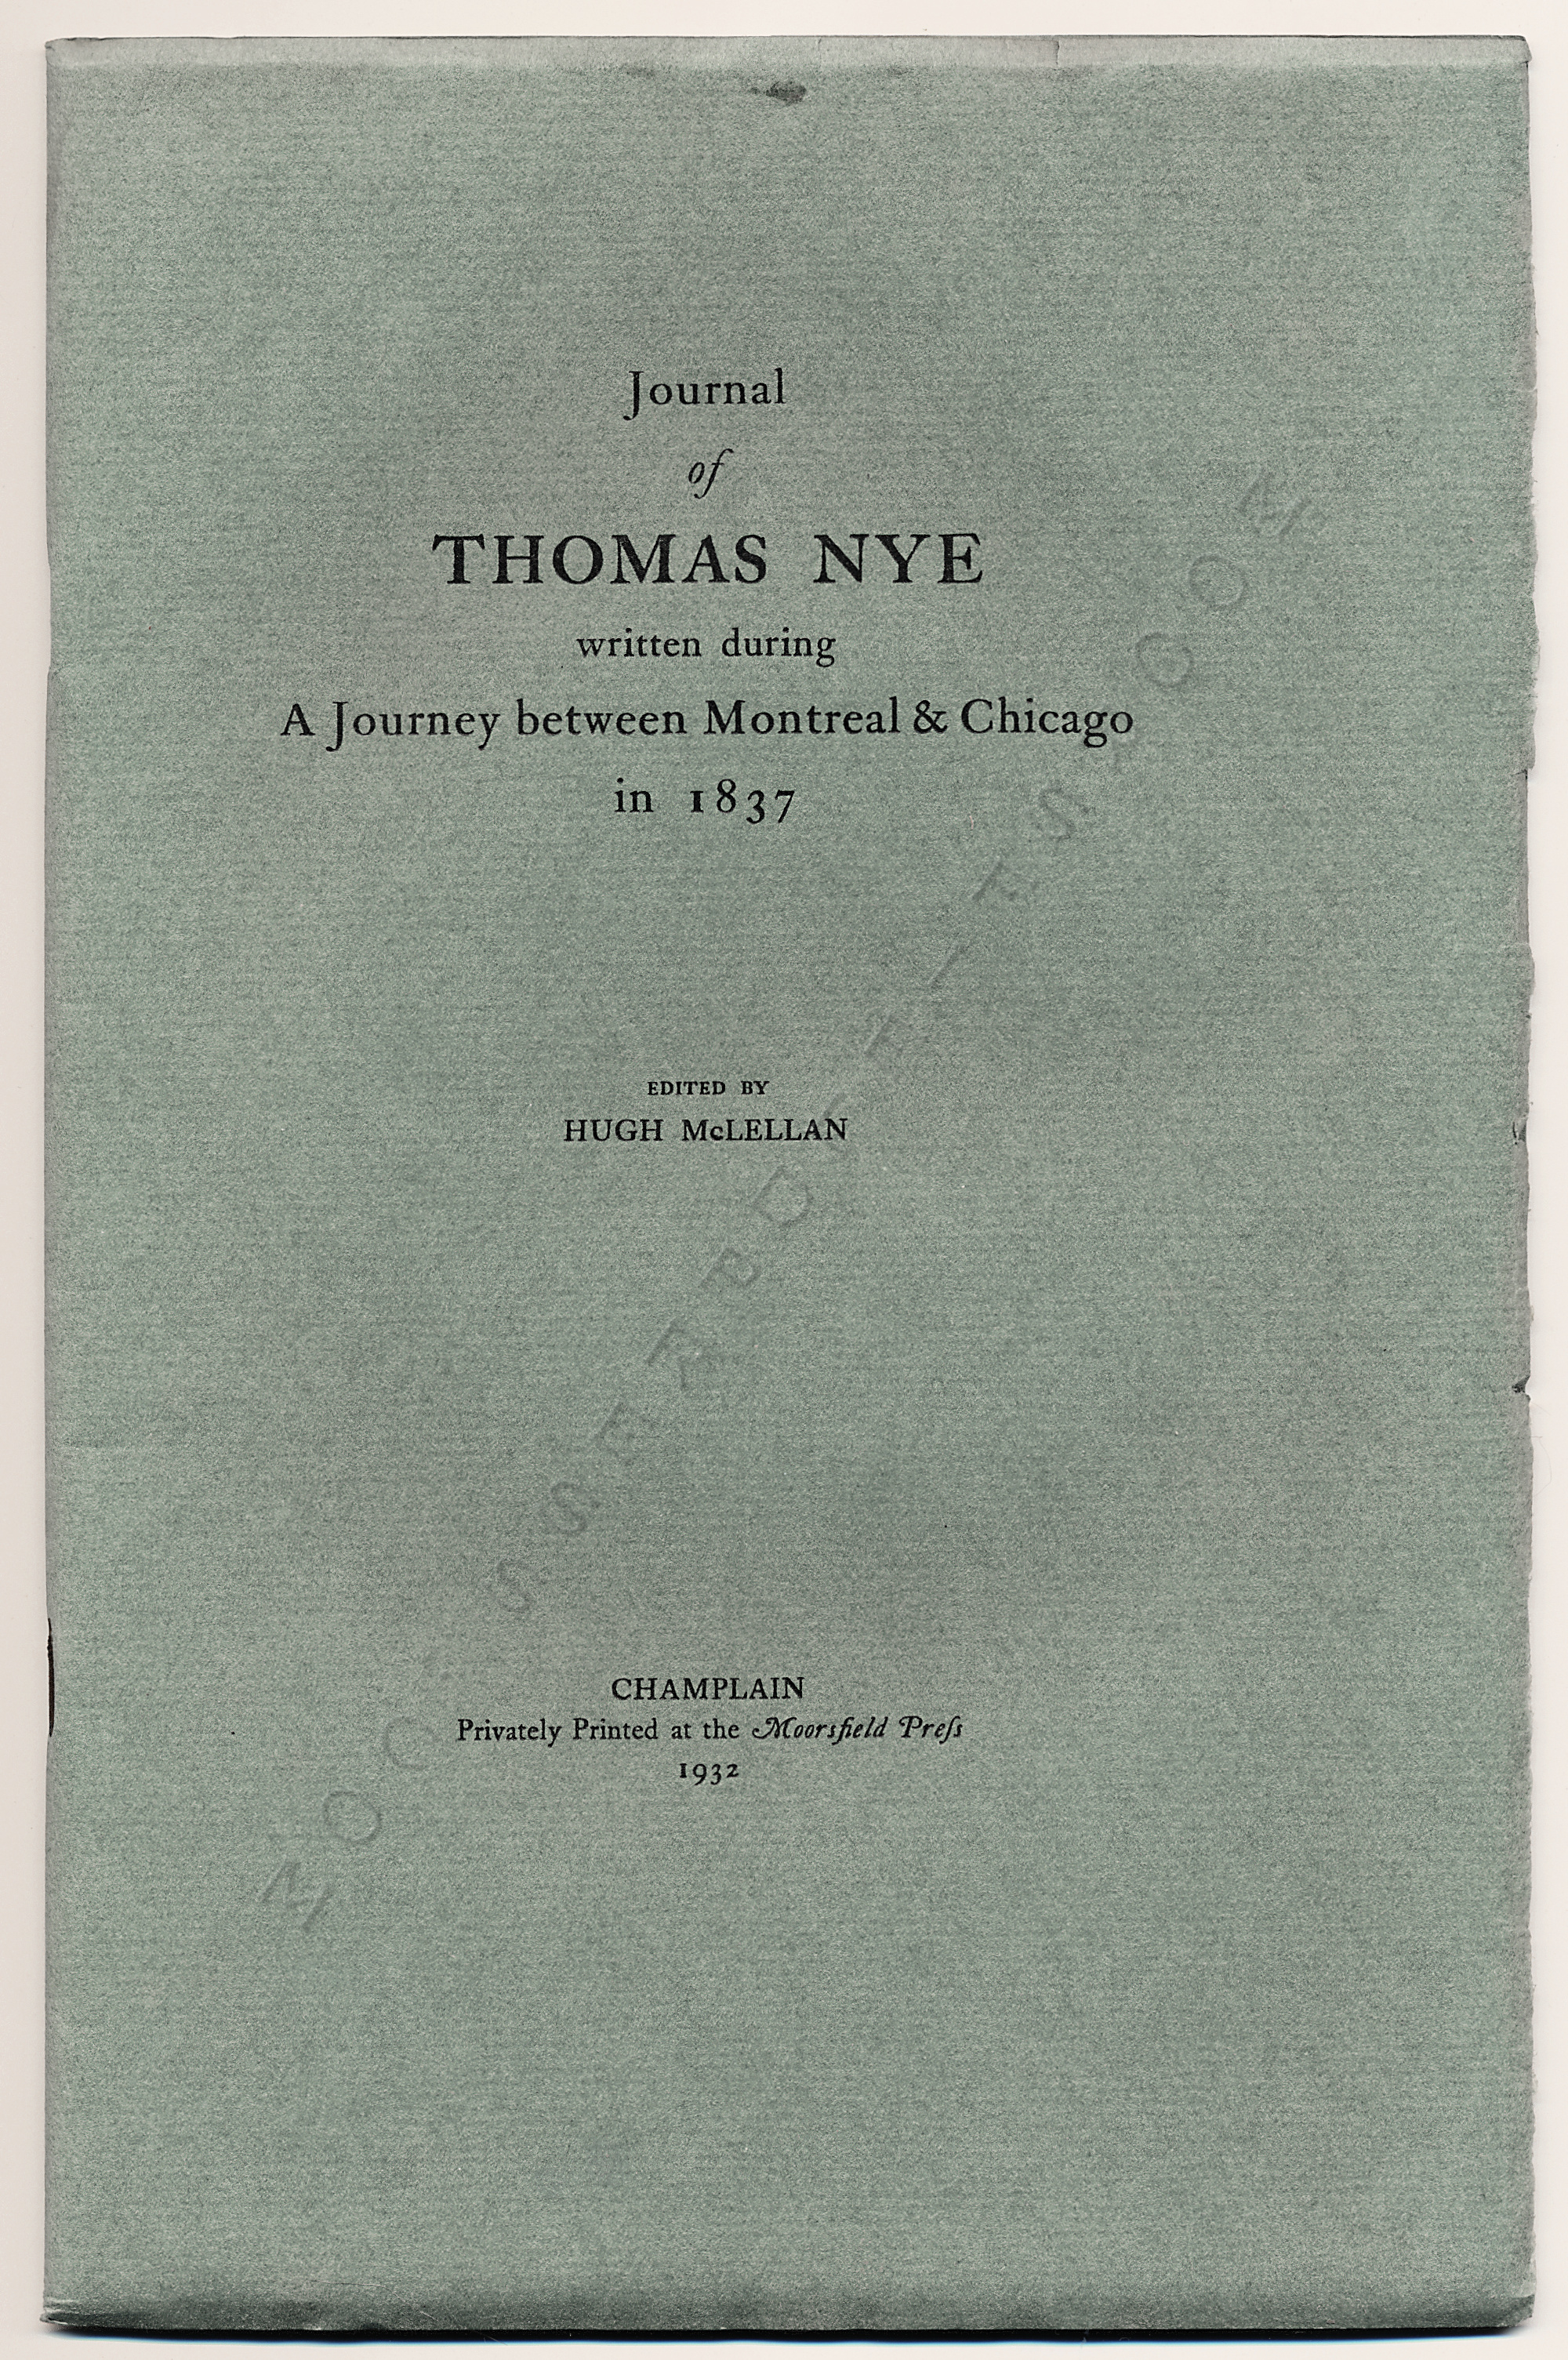 JOURNAL OF
                      THOMAS NYE WRITTEN DURING A JOURNEY BETWEEN
                      MONTREAL & CHICAGO IN 1837